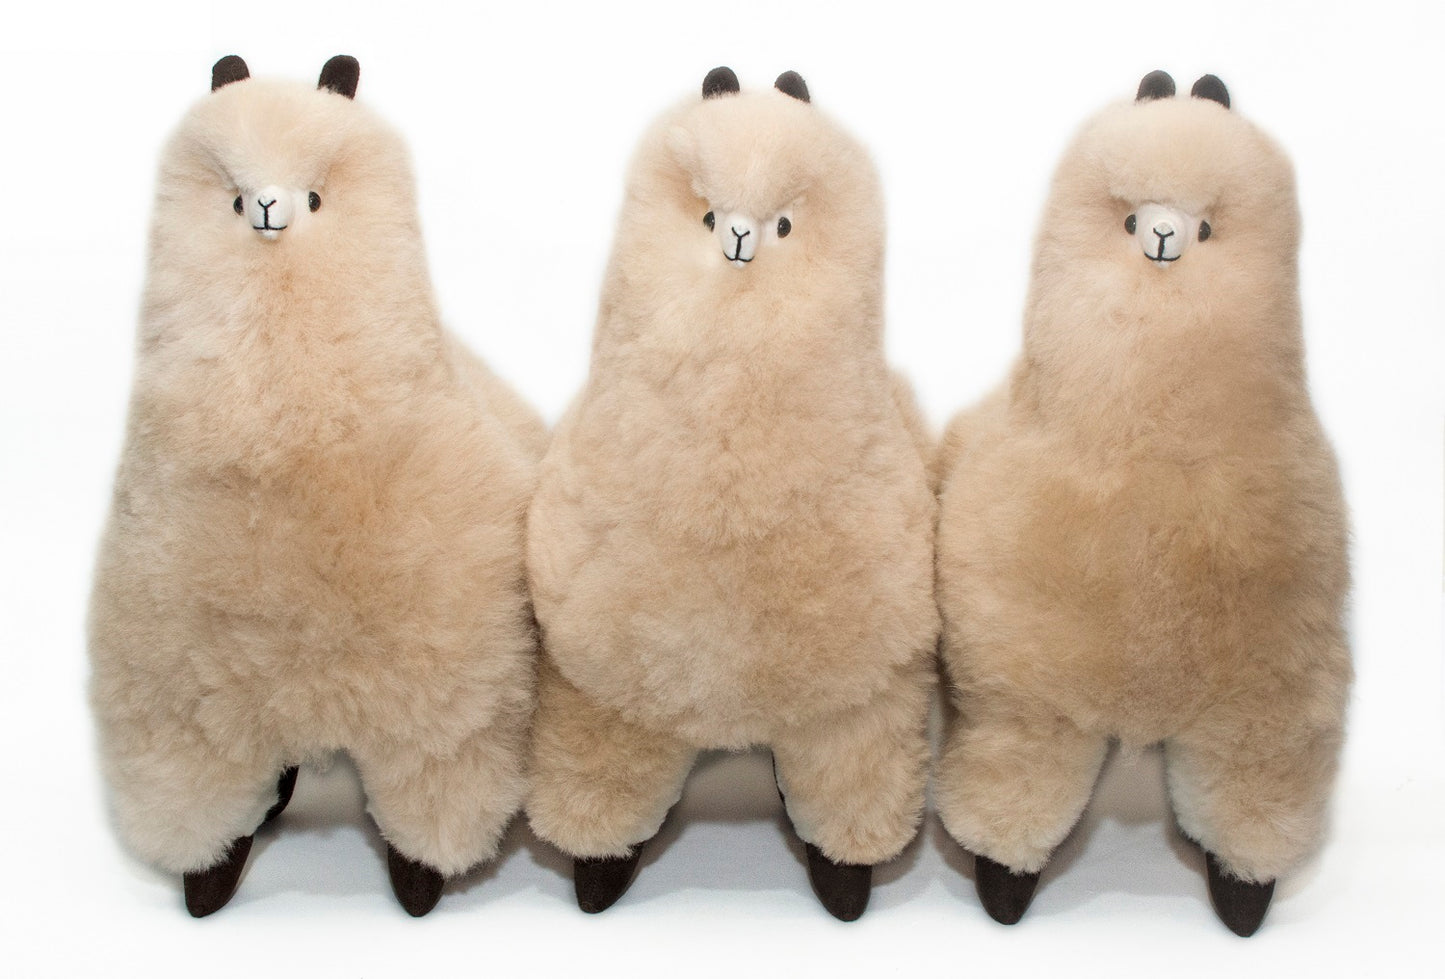 Soft alpaca fur stuffed animal. Beige, 18 inches. You can have one